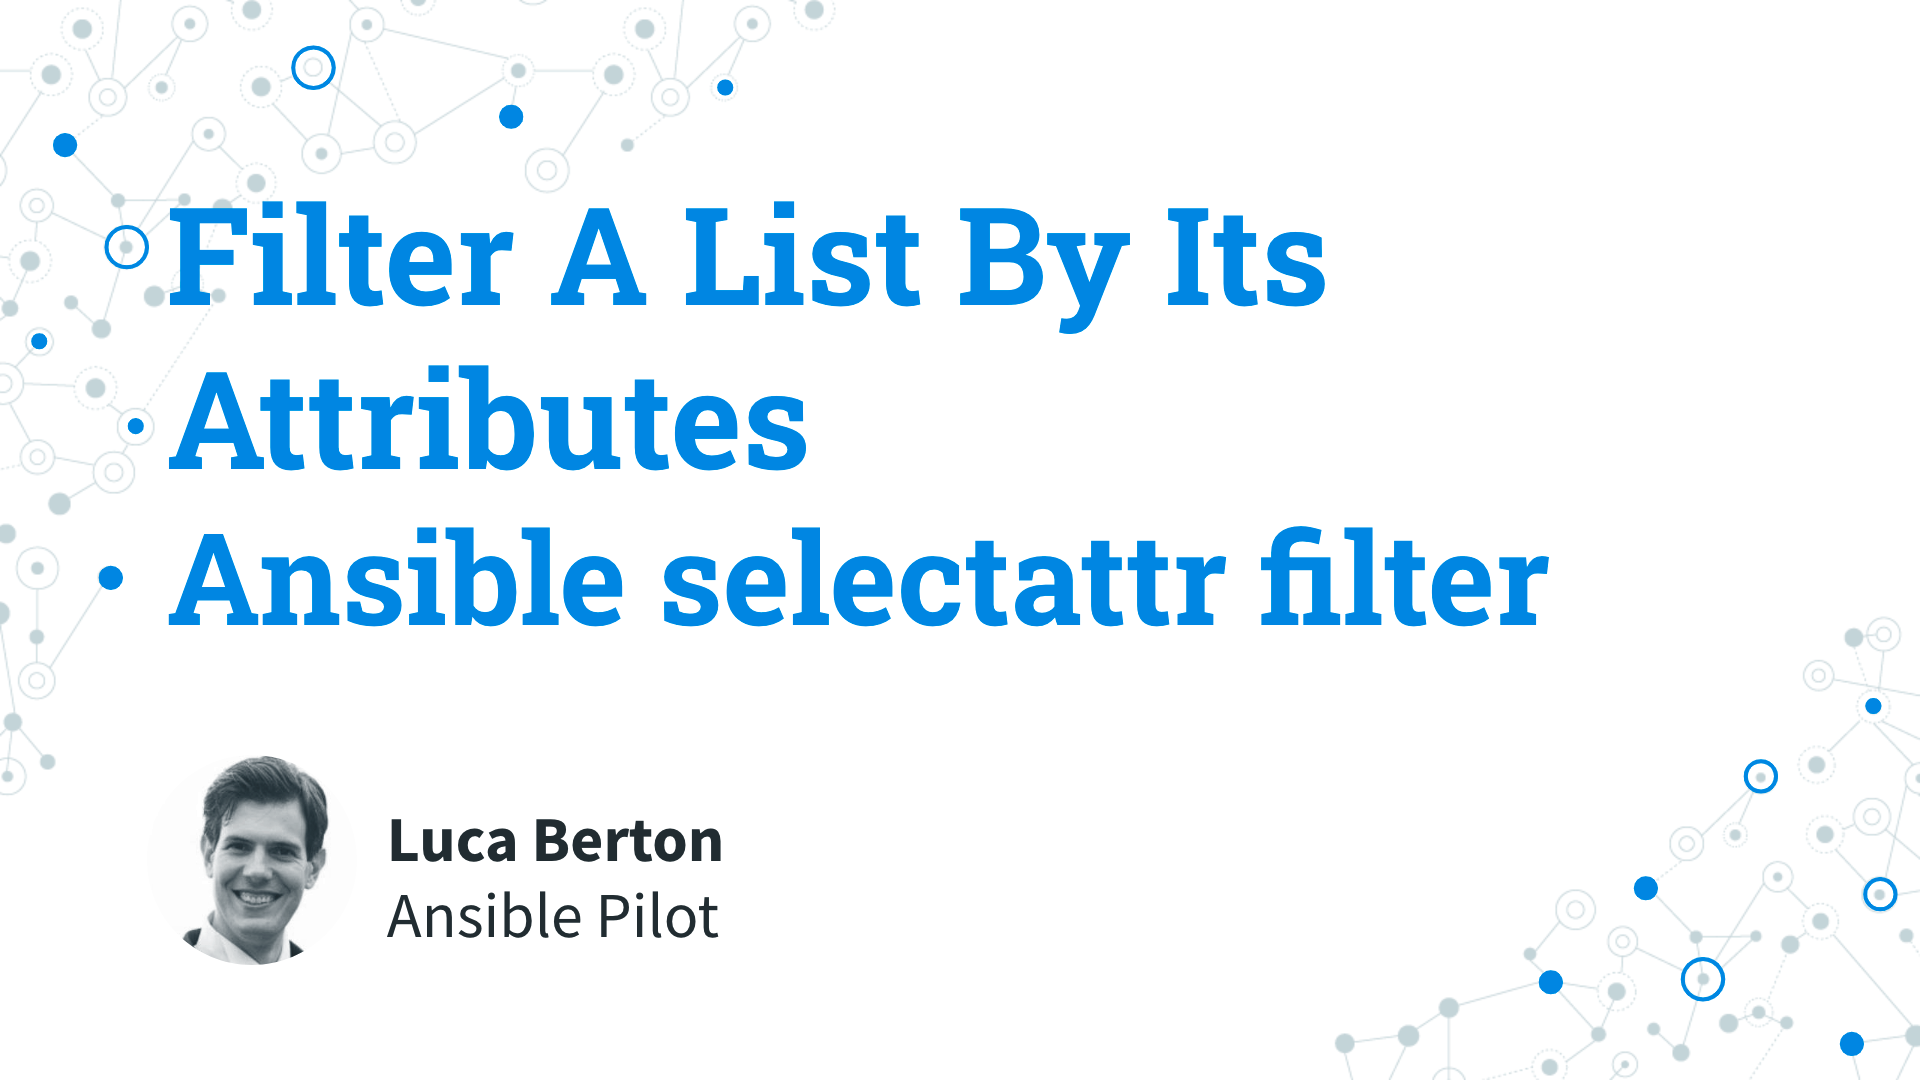 Filter A List By Its Attributes - Ansible selectattr filter